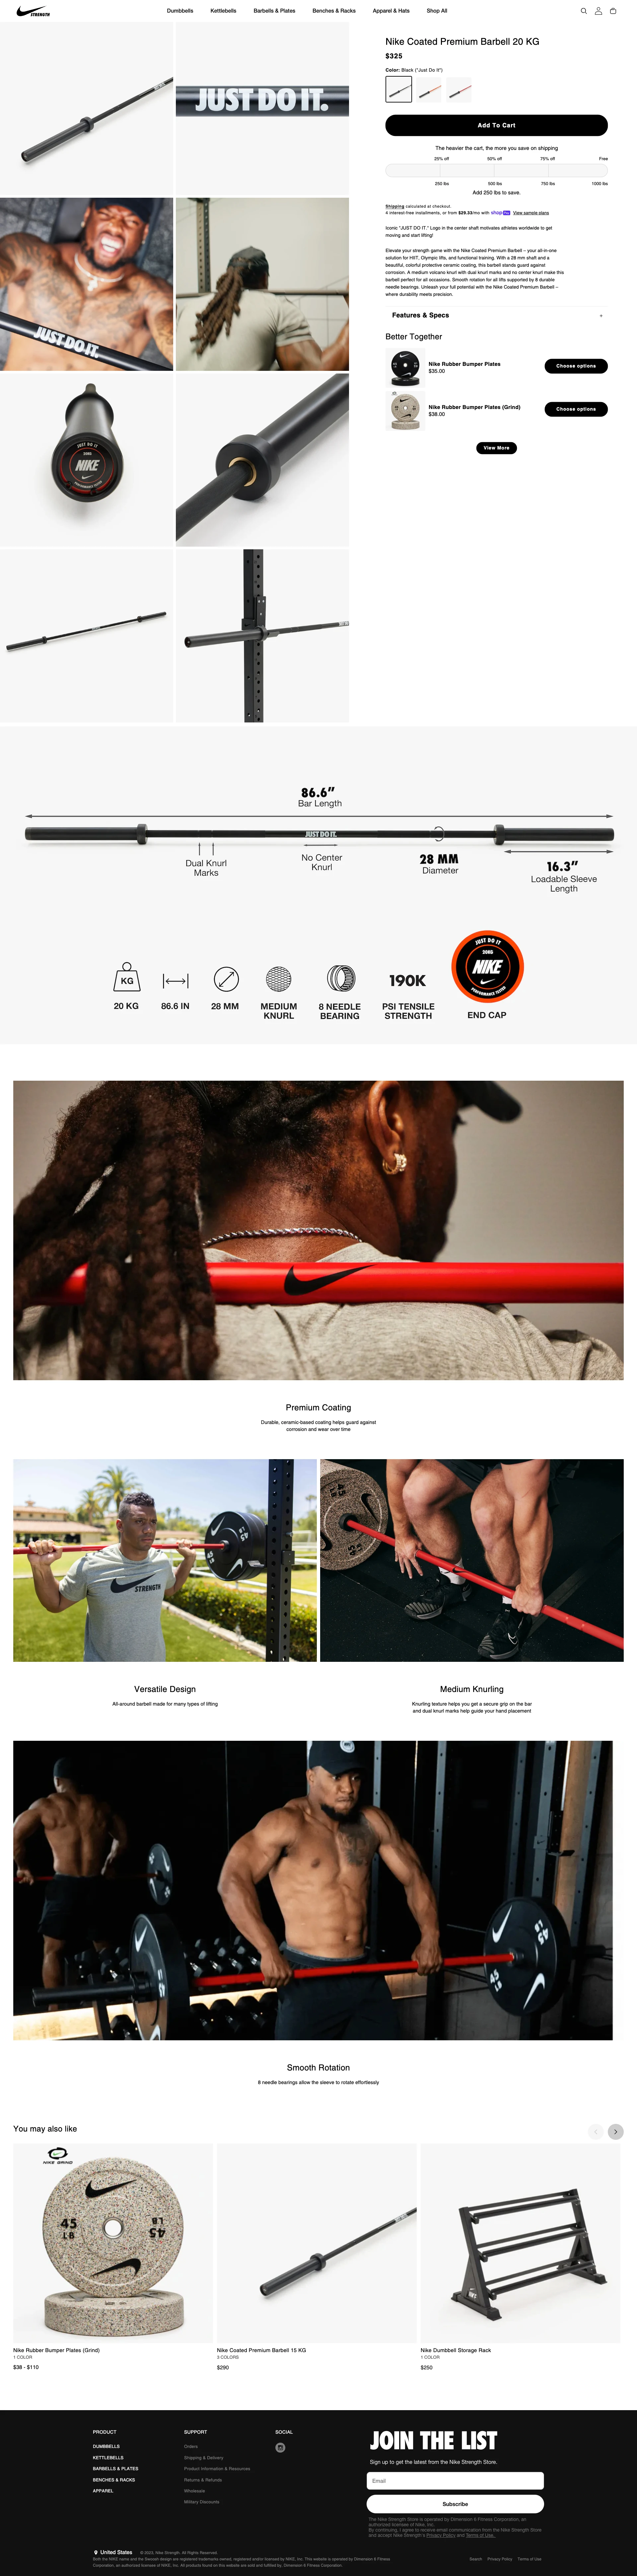 Nike Strength Landing Page Example: Elevate your training. Home gym equipment for all athletes. Dumbbells, Kettlebells, Barbells & Plates, Benches & Racks, Apparel & Hats. Proven and tested by championship athletes.